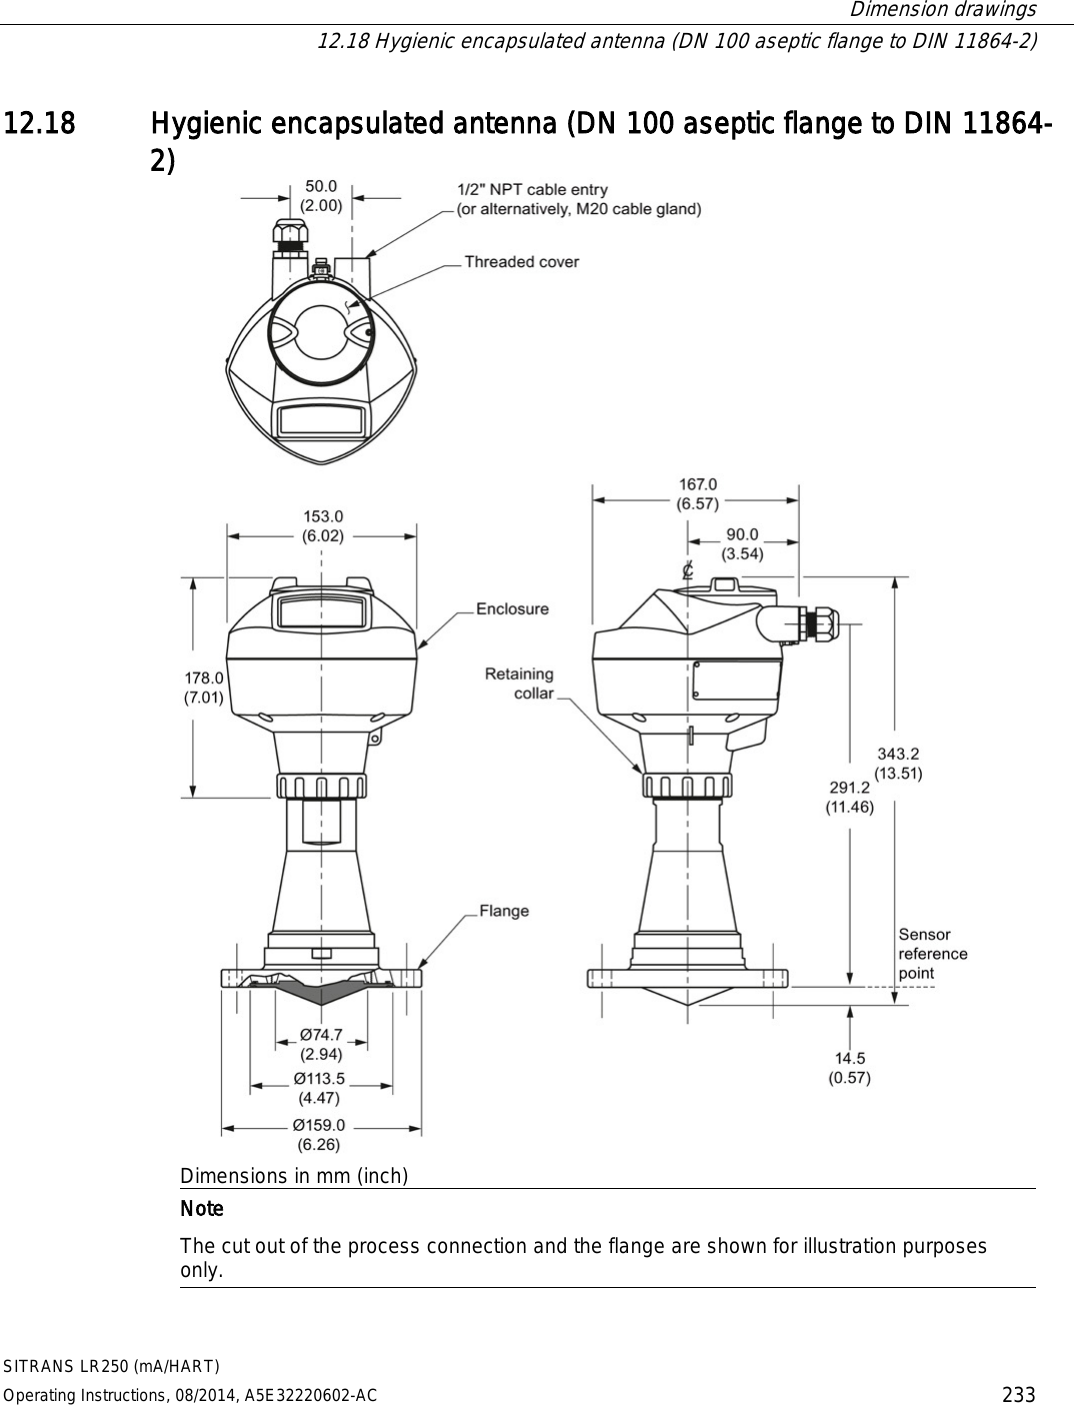  Dimension drawings  12.18 Hygienic encapsulated antenna (DN 100 aseptic flange to DIN 11864-2) SITRANS LR250 (mA/HART) Operating Instructions, 08/2014, A5E32220602-AC 233 12.18 Hygienic encapsulated antenna (DN 100 aseptic flange to DIN 11864-2)  Dimensions in mm (inch)  Note The cut out of the process connection and the flange are shown for illustration purposes only.  